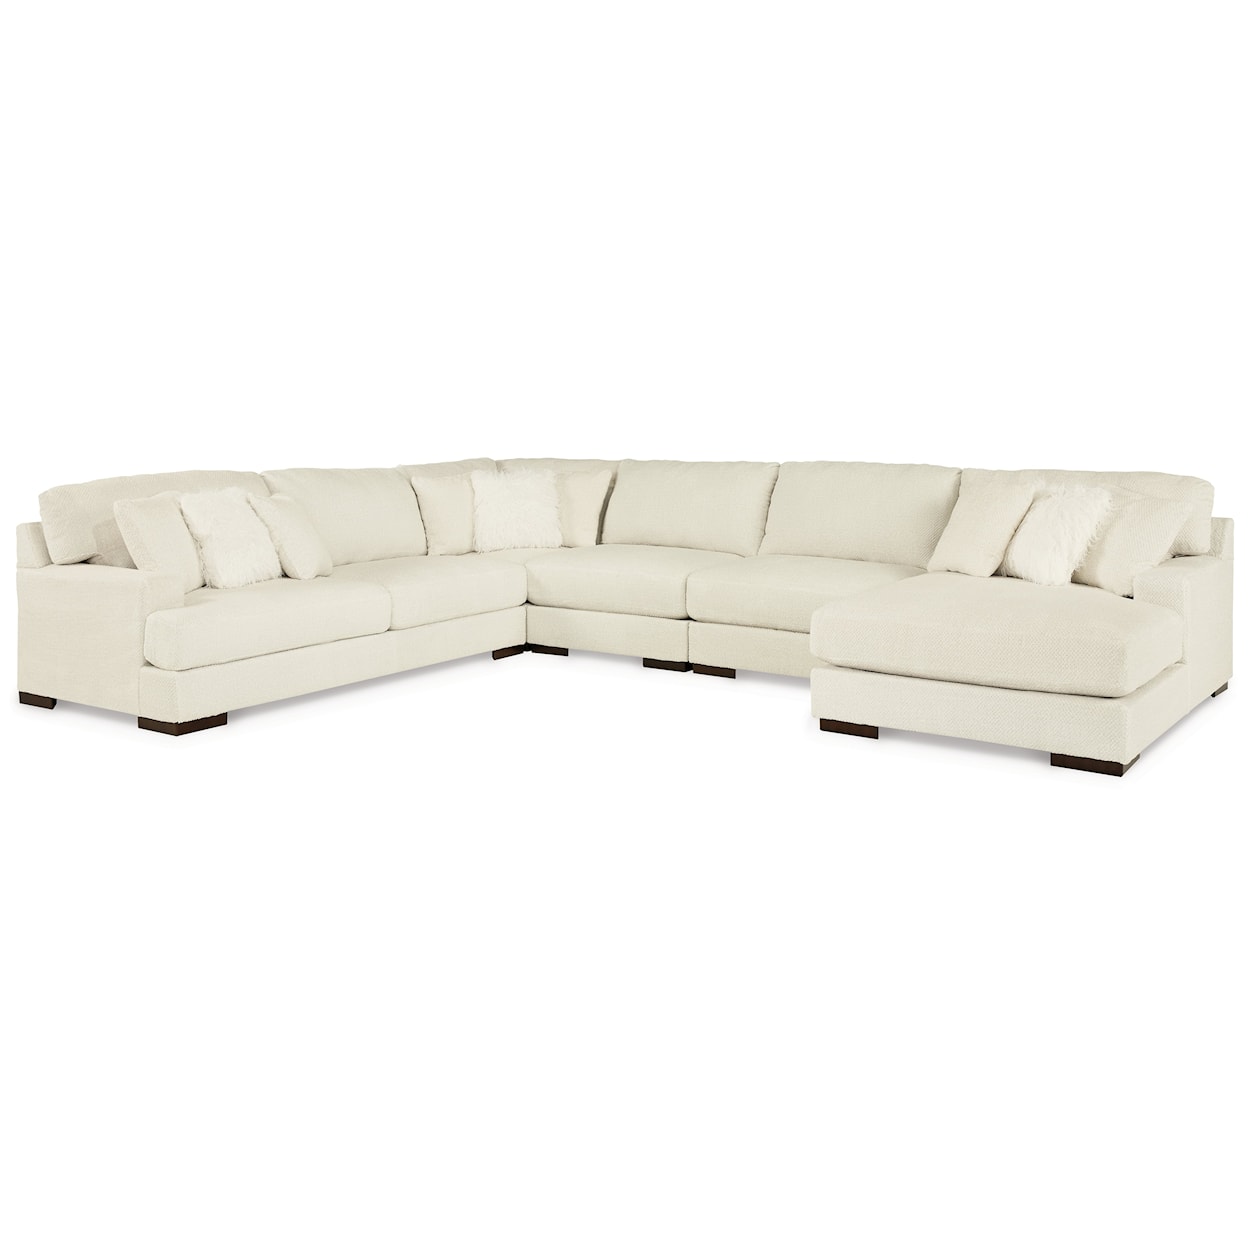 Ashley Furniture Signature Design Zada 5-Piece Sectional with Chaise